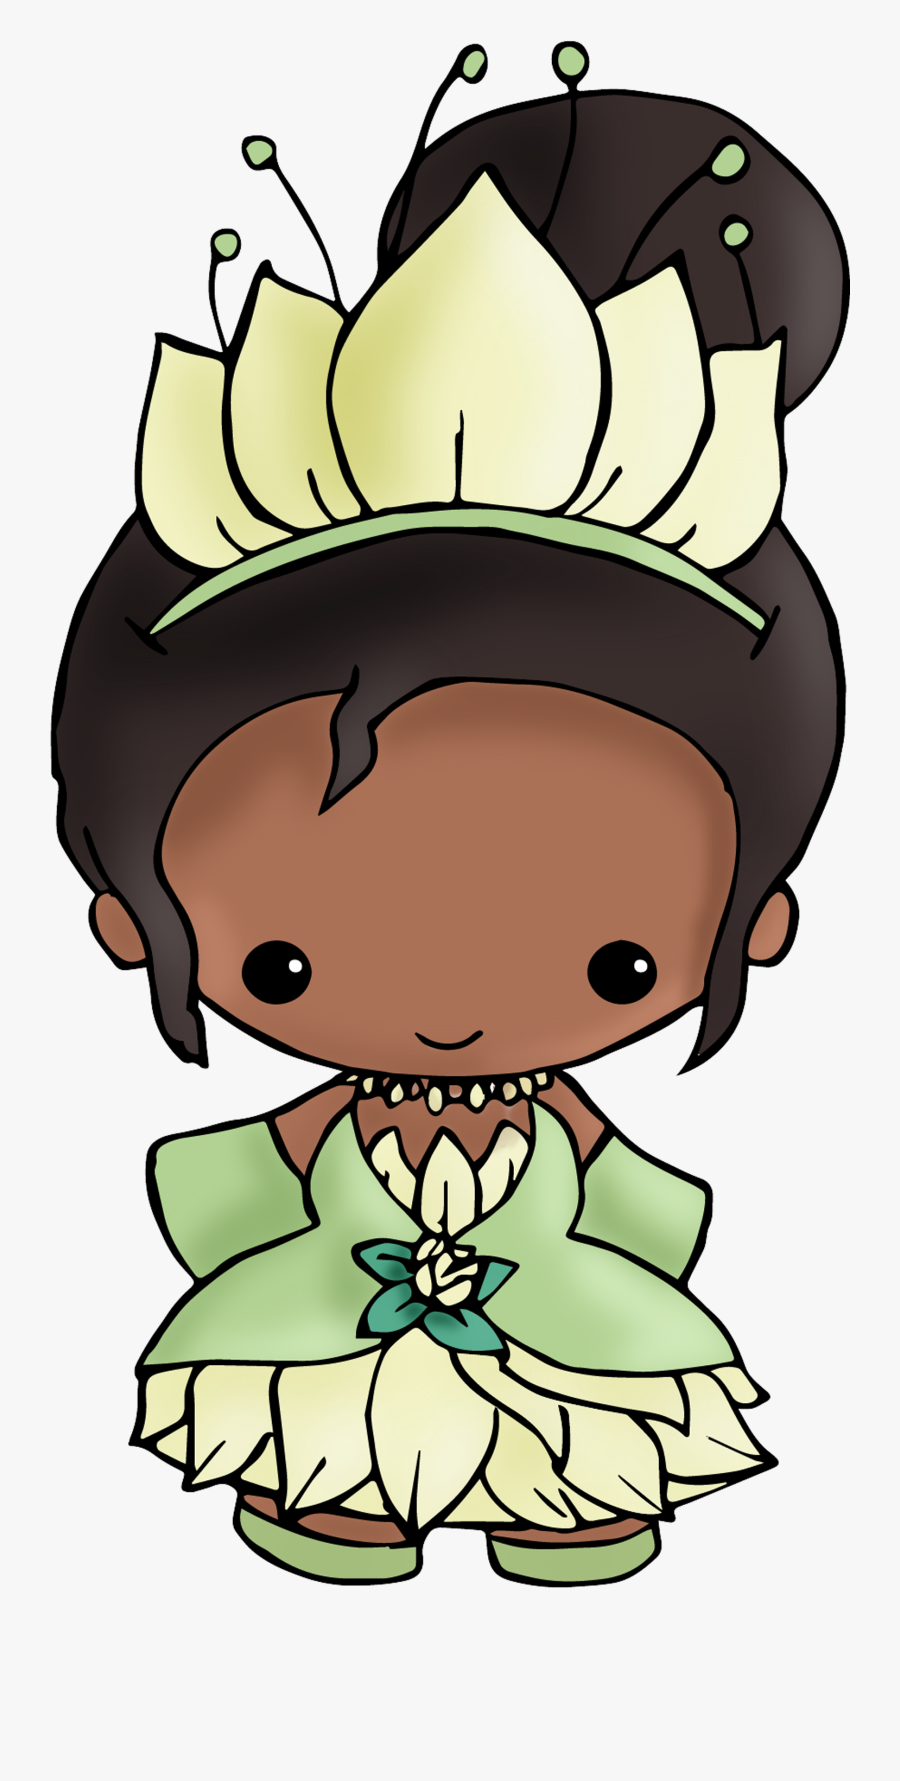 Tiana Available On Shirts And Stickers Here - Draw Chibi Princess Tiana, Transparent Clipart